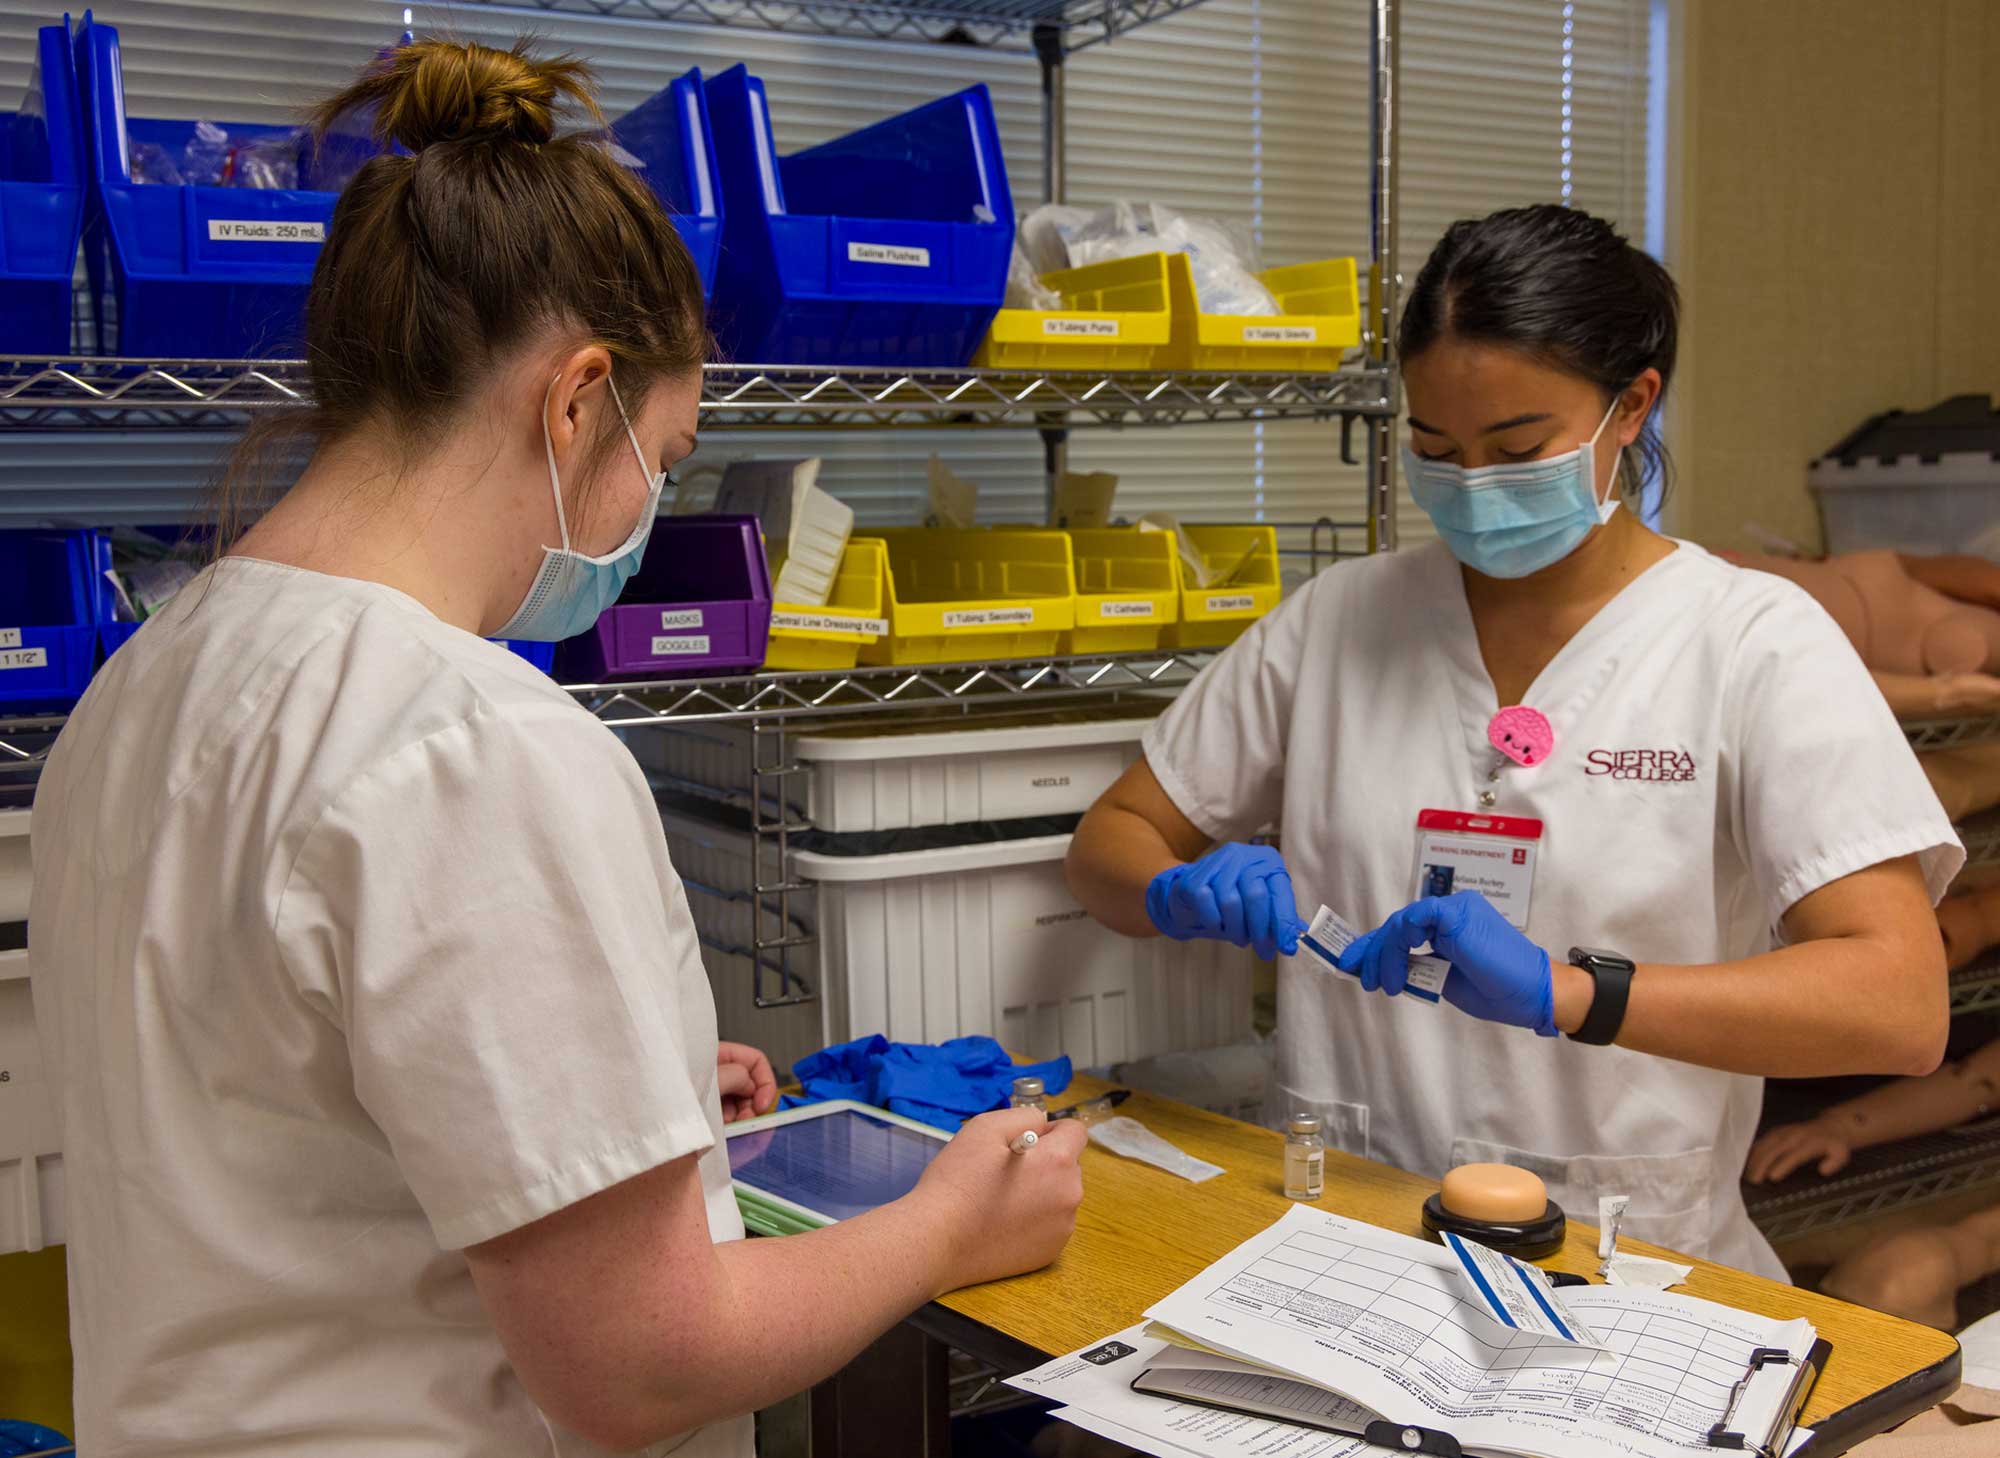 Nursing students preparing syringes to give an injection of medicine